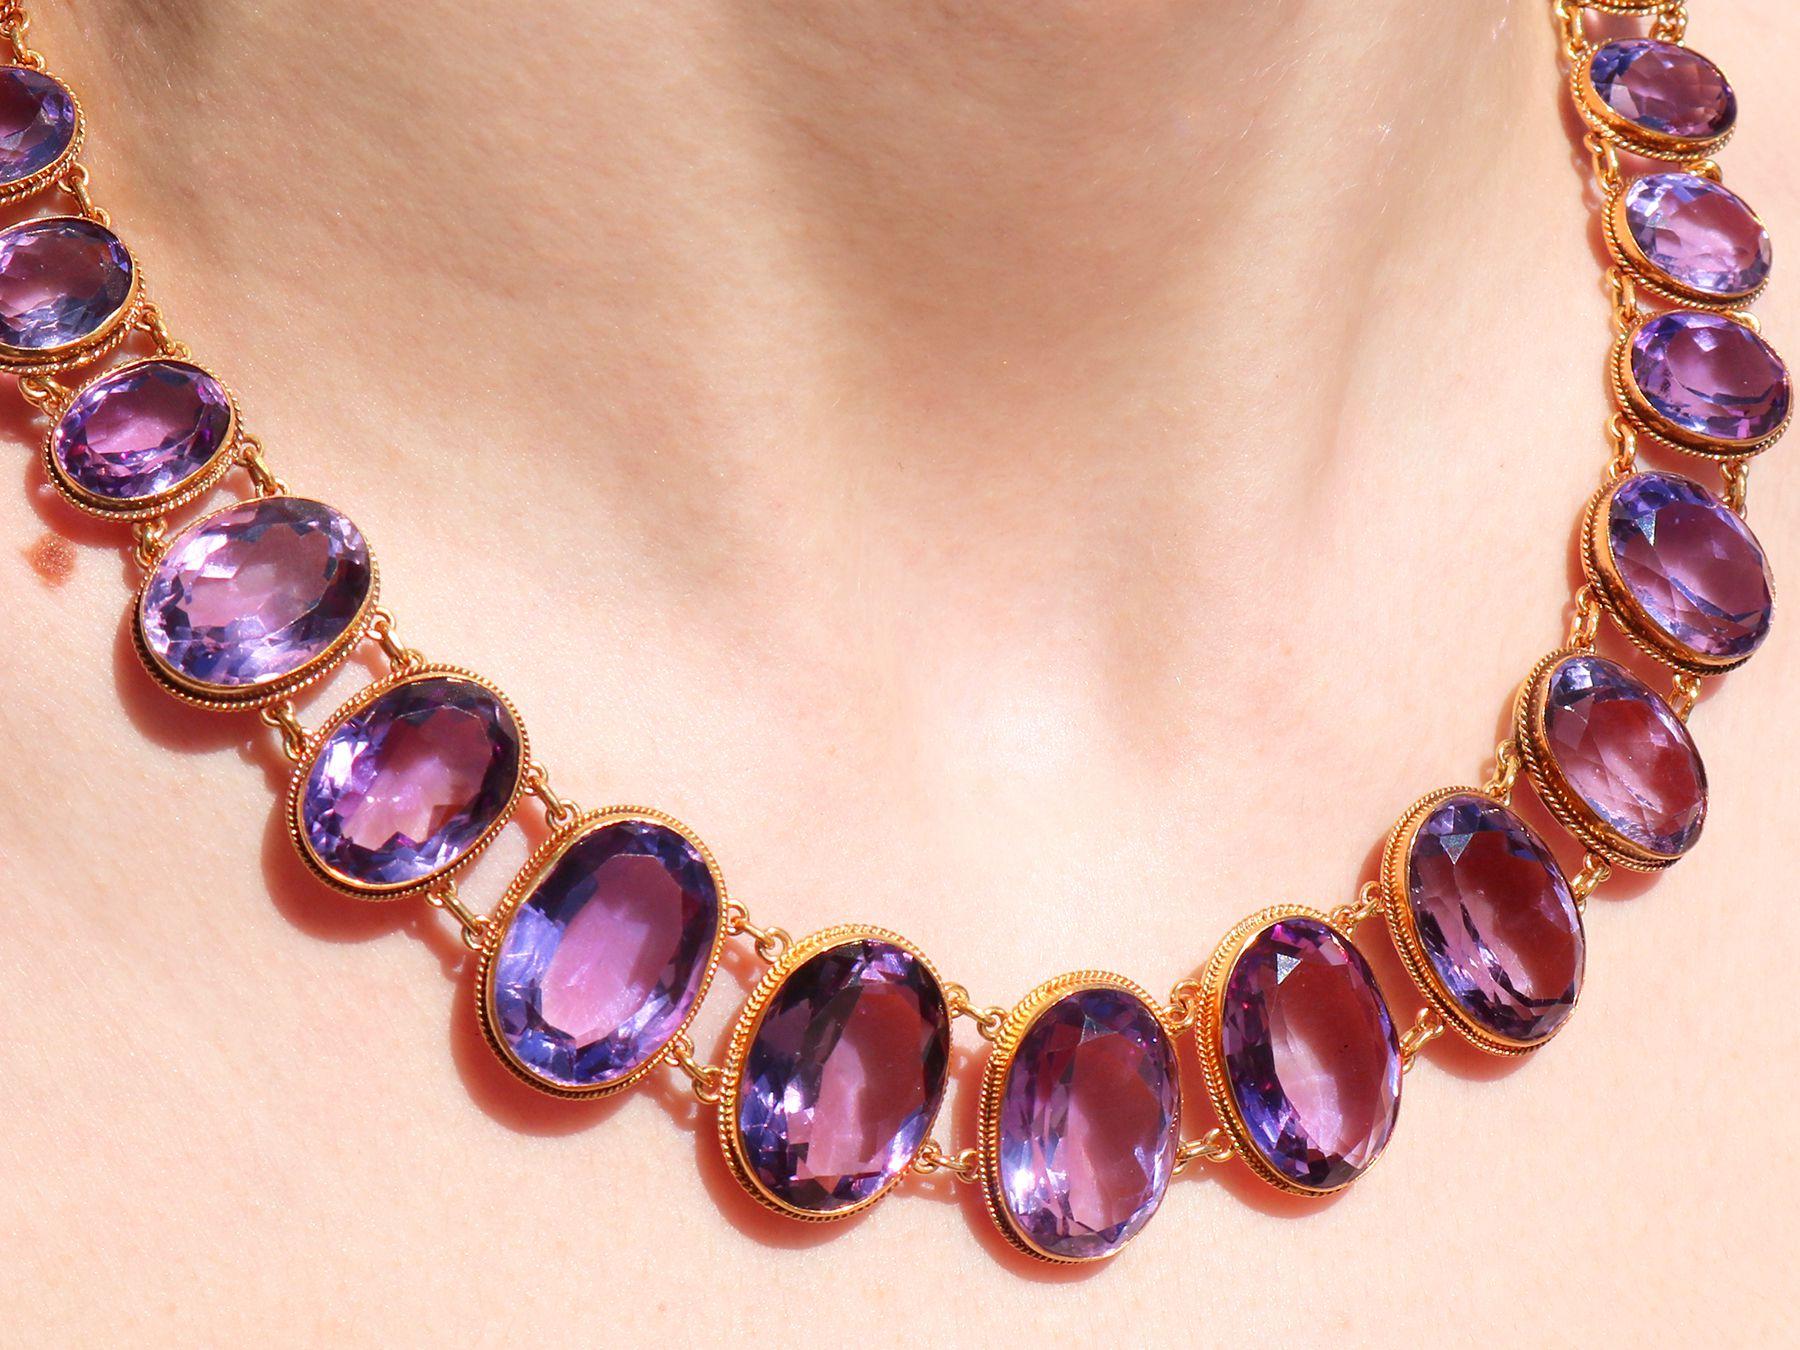 Antique Victorian 274.91 Carat Amethyst and Yellow Gold Rivière Necklace For Sale 3